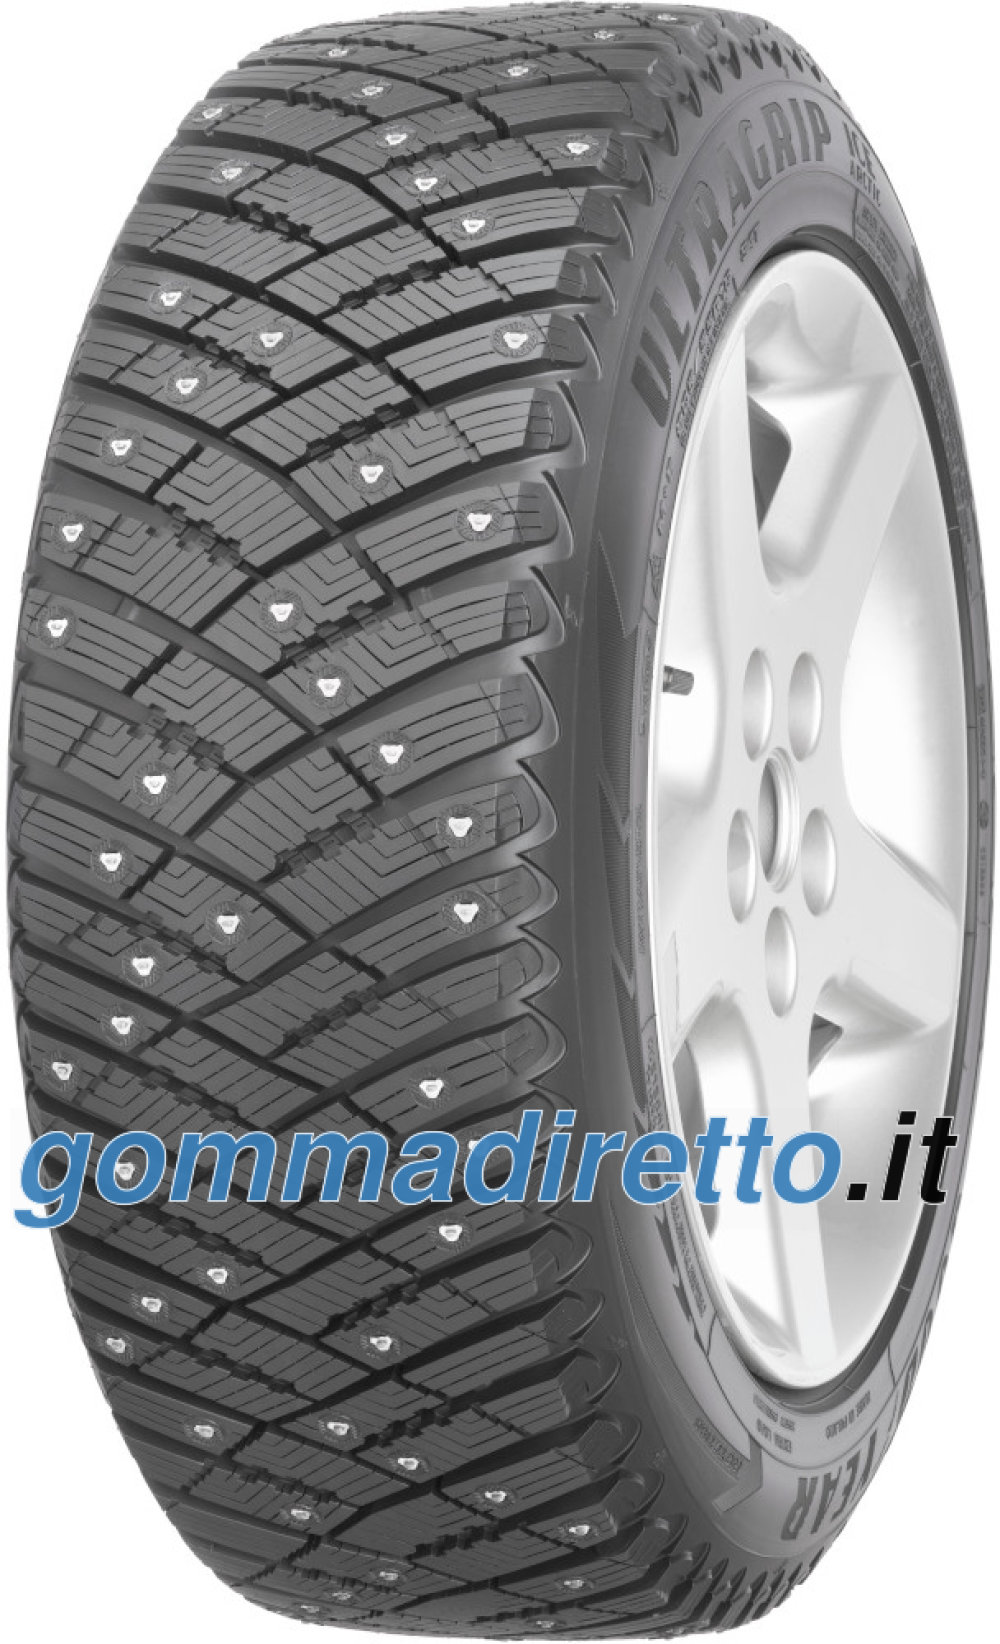 Image of Goodyear Ultra Grip Ice Arctic ( 195/65 R15 95T XL, pneumatico chiodato )